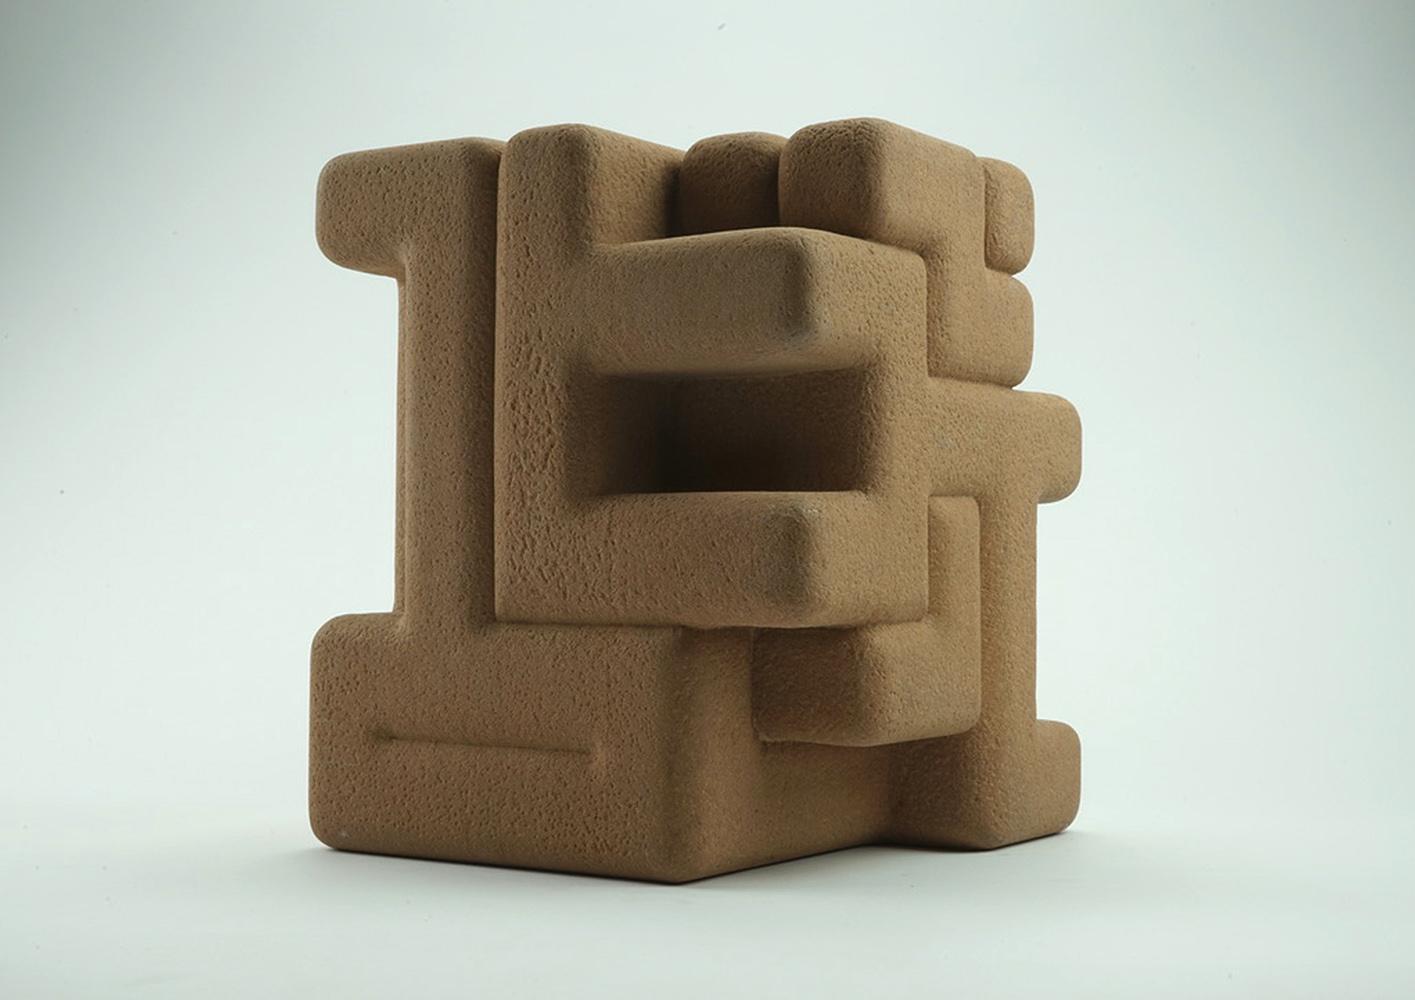 Six sides to a cube by Richard Perry - Abstract geometric sculpture, sandstone For Sale 1